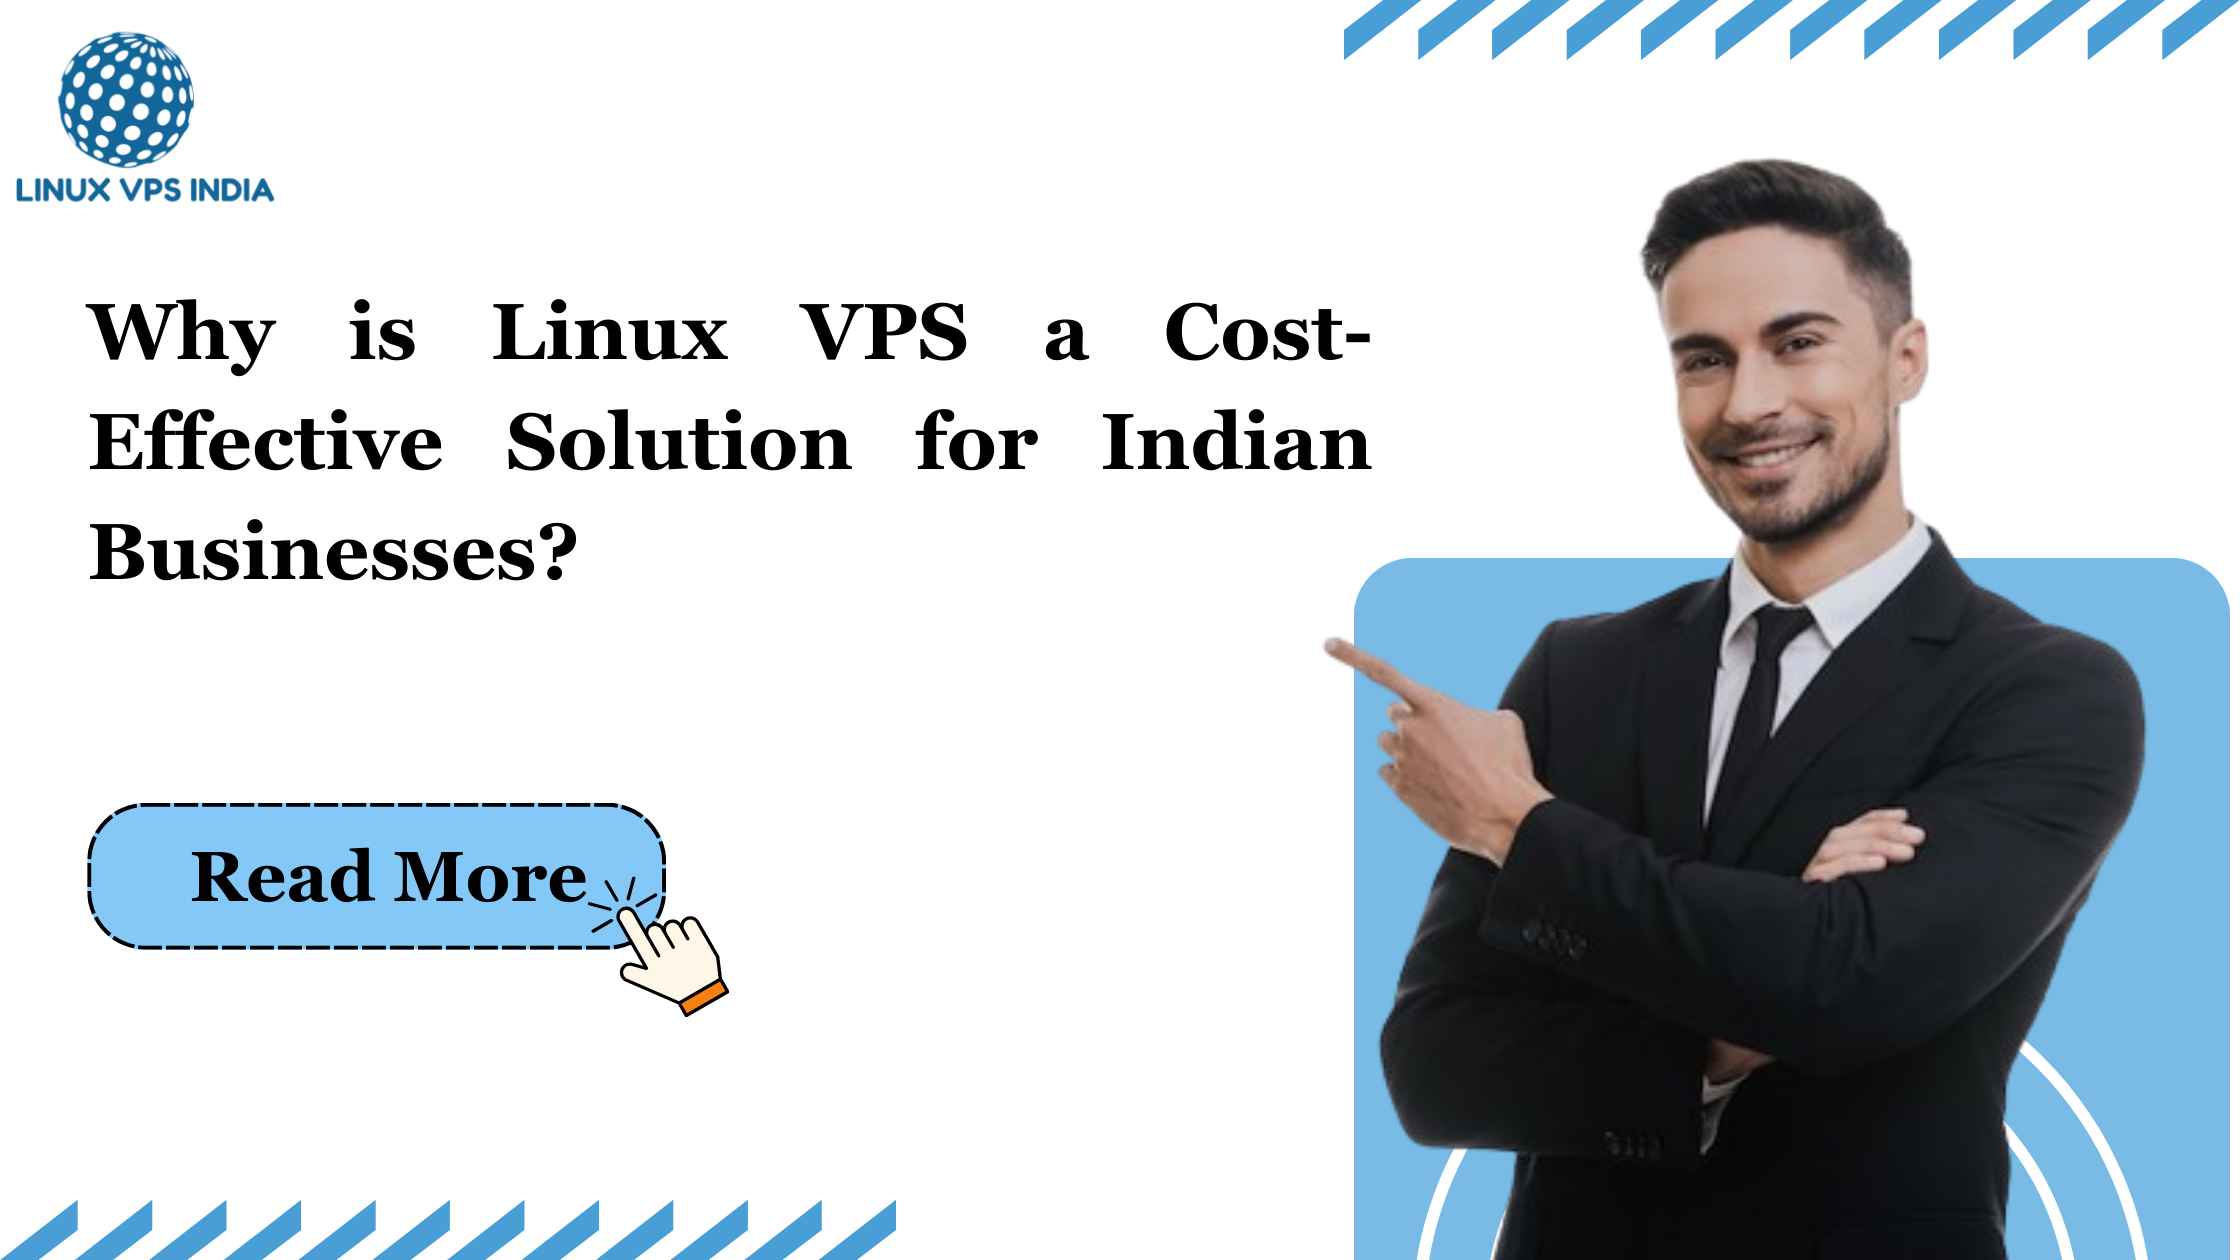 Why is Linux VPS a Cost-Effective Solution for Indian Businesses